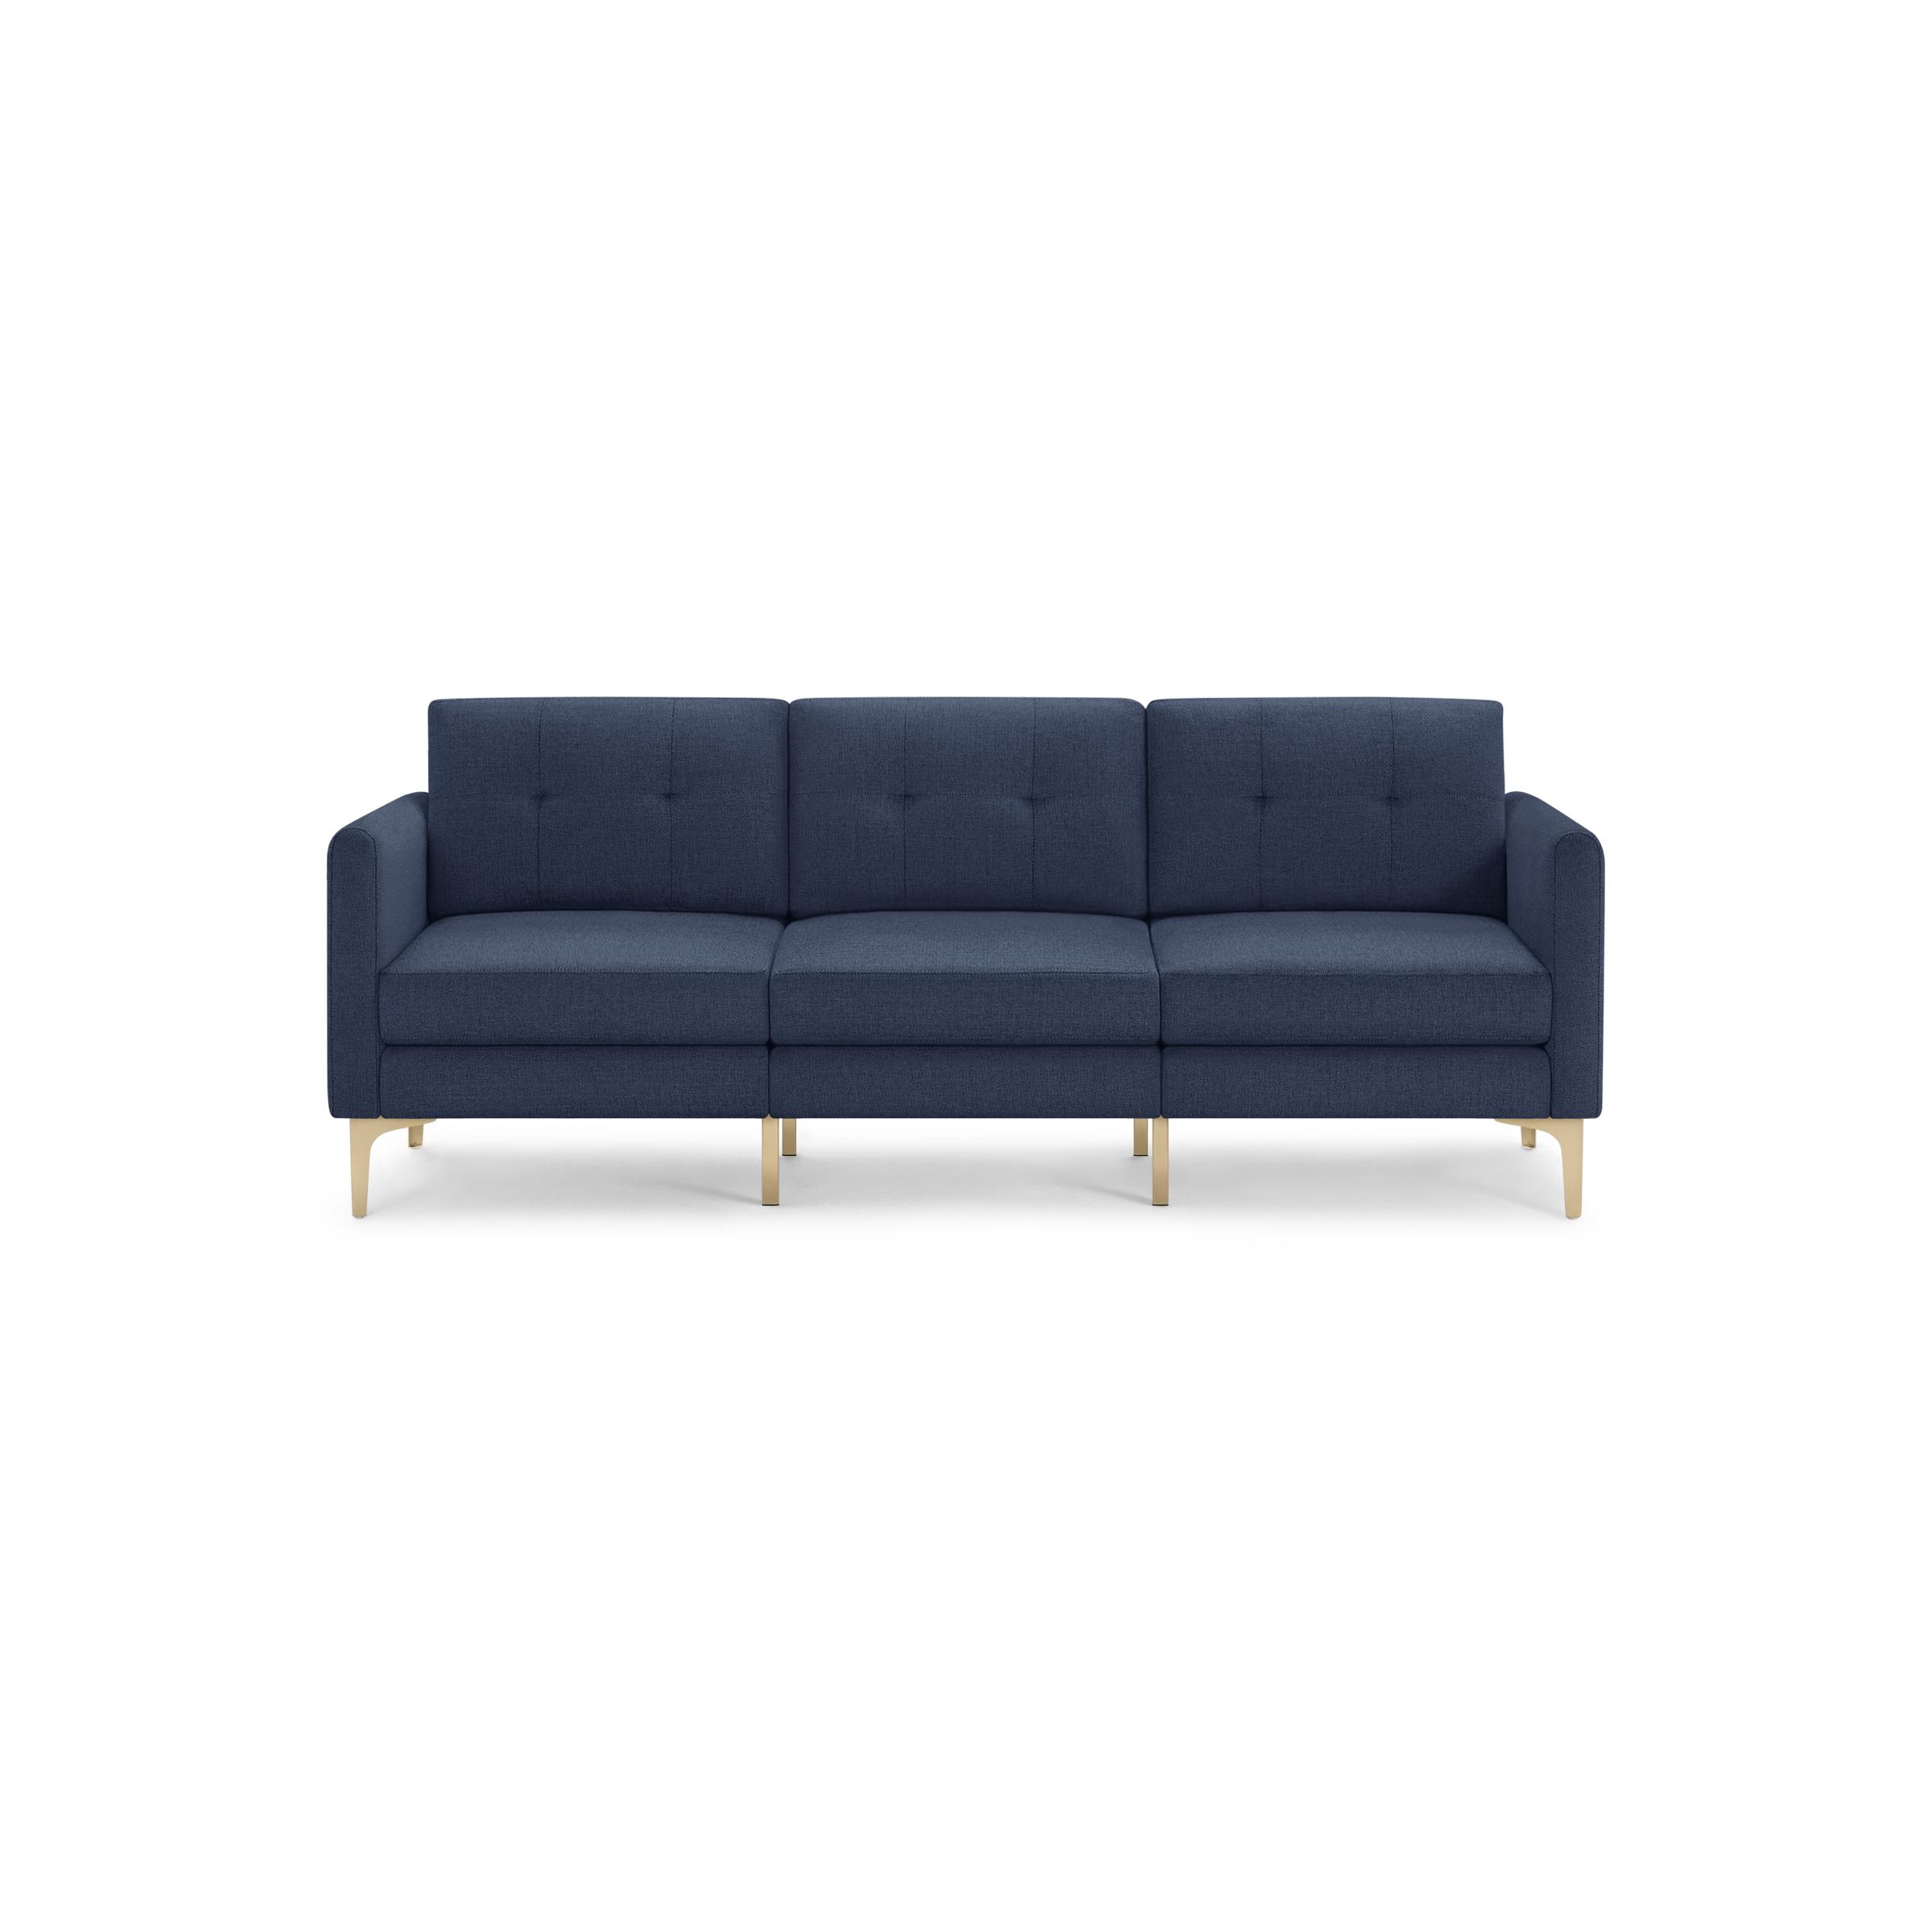 Nomad Sofa in Navy Blue, Brass Legs - Image 0